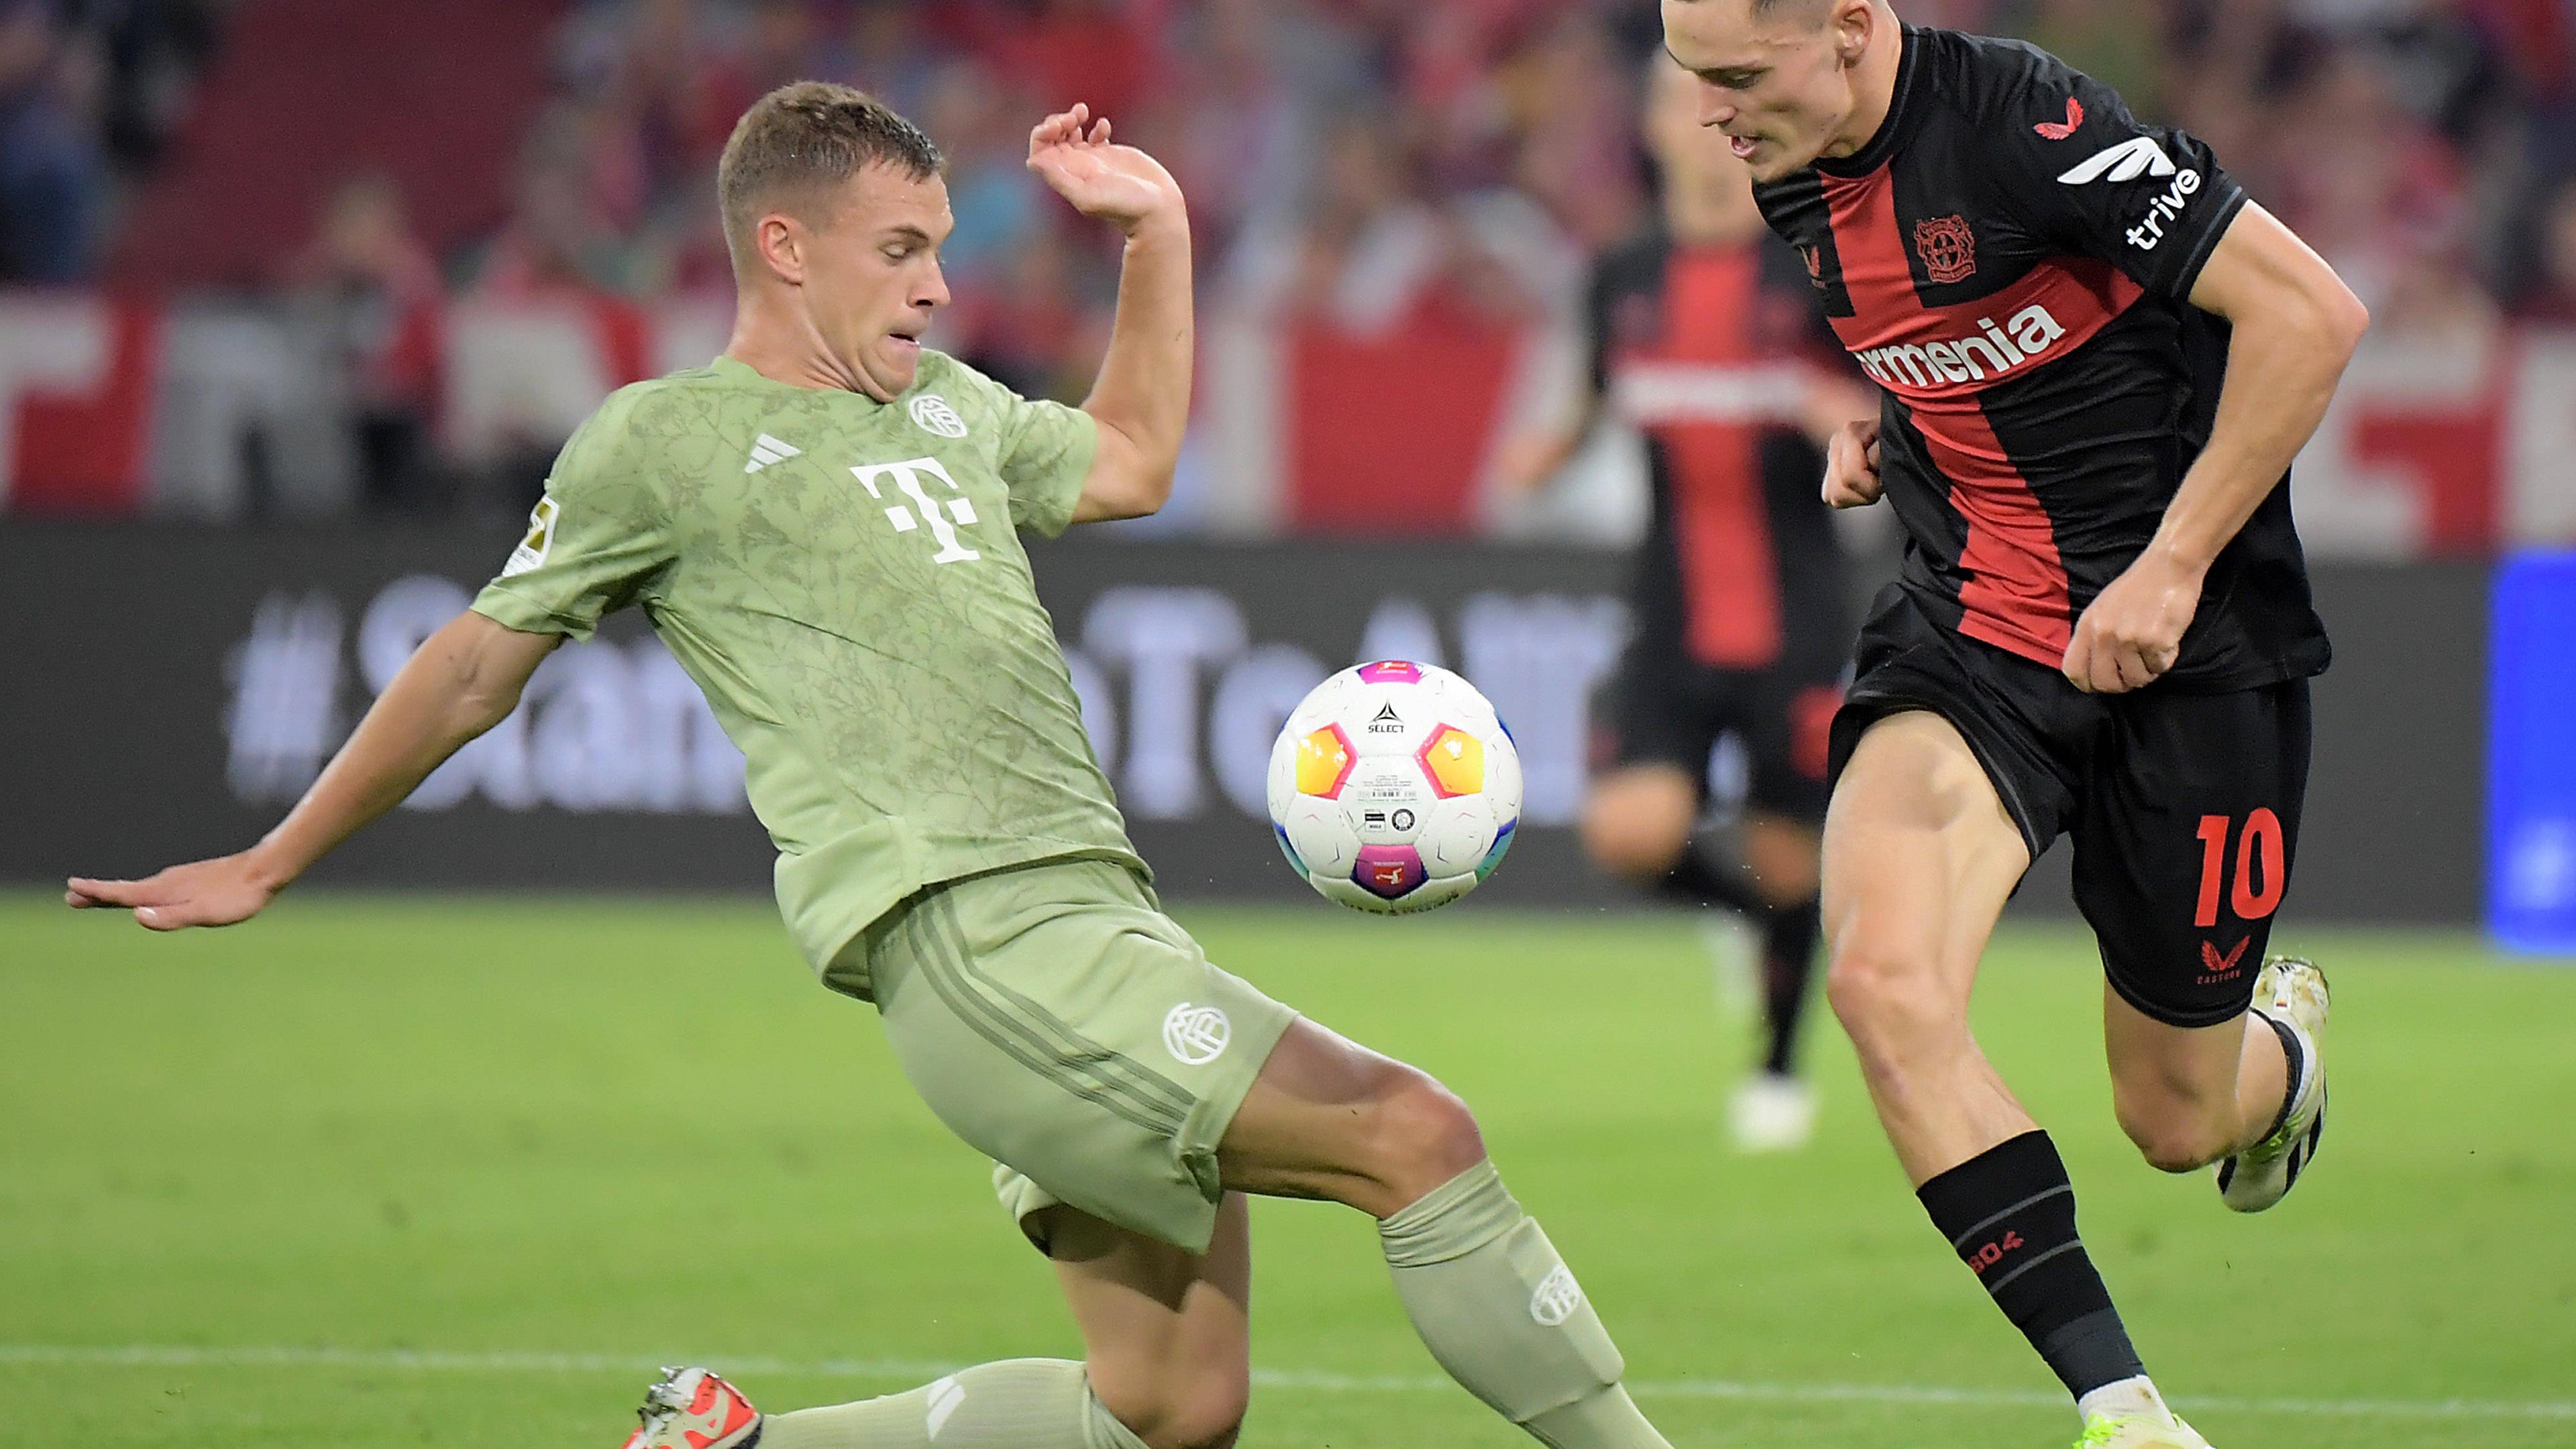 Joshua Kimmich (FC Bayern Muenchen) and Florian Wirtz (Bayer 04 Leverkusen) in a duel on September 15th, 23rd